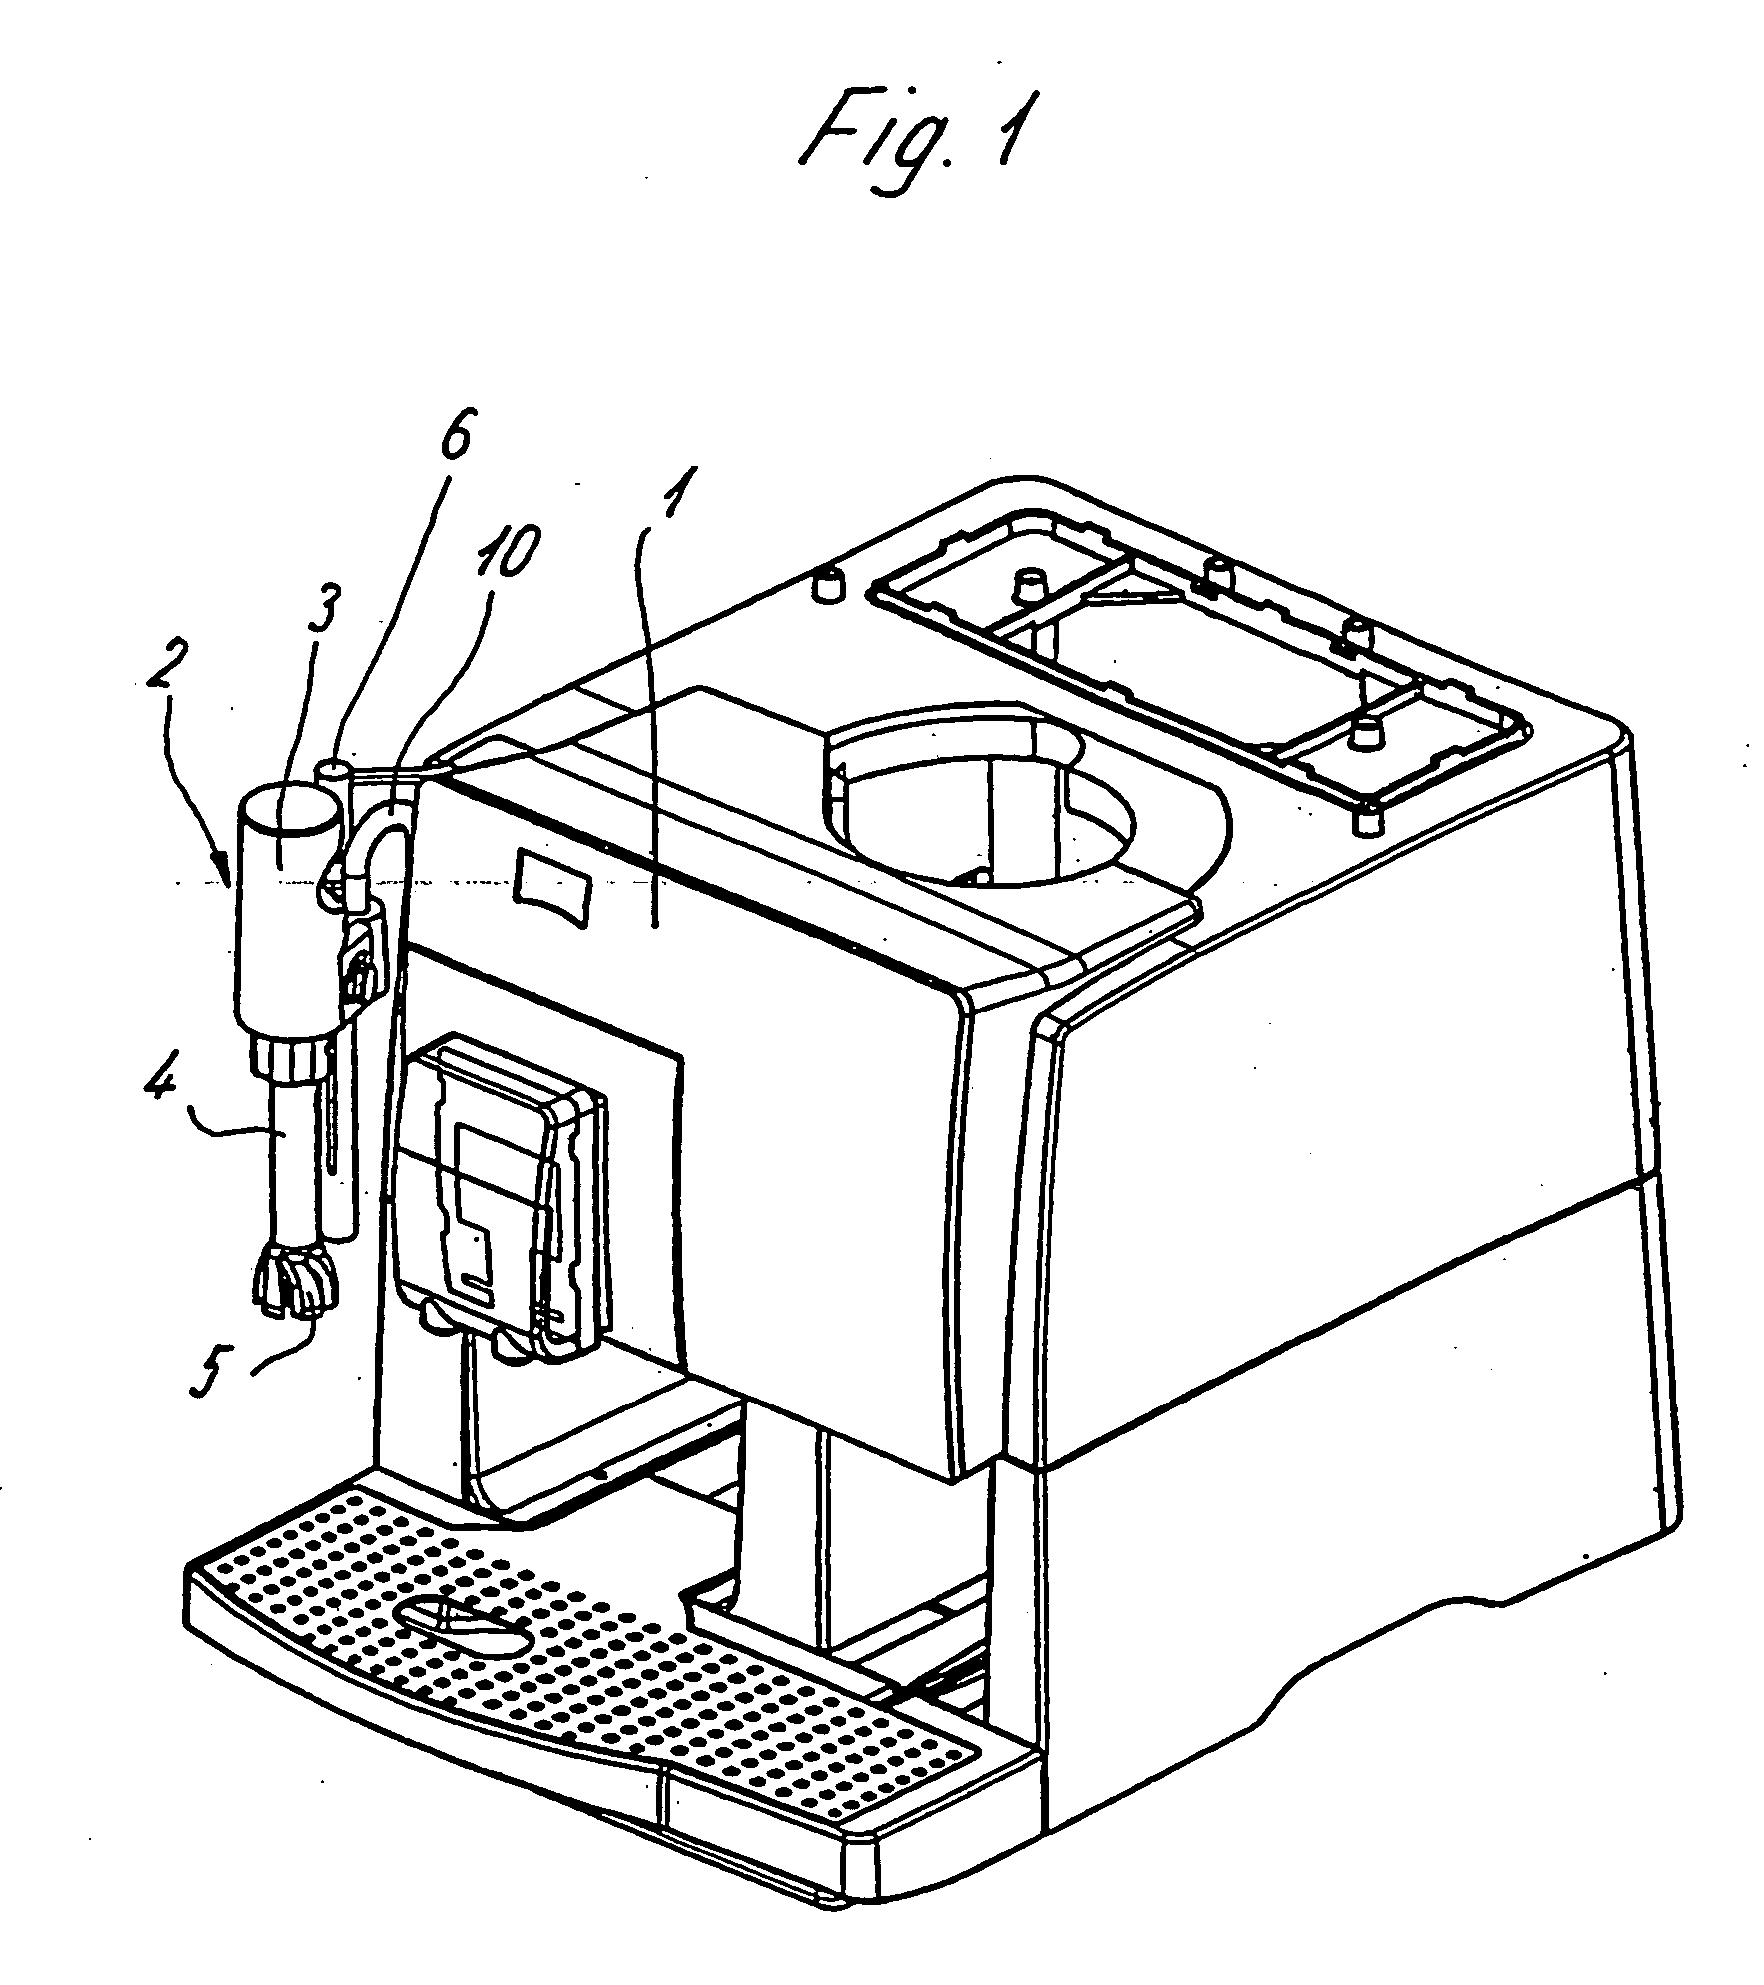 Device for foaming a liquid